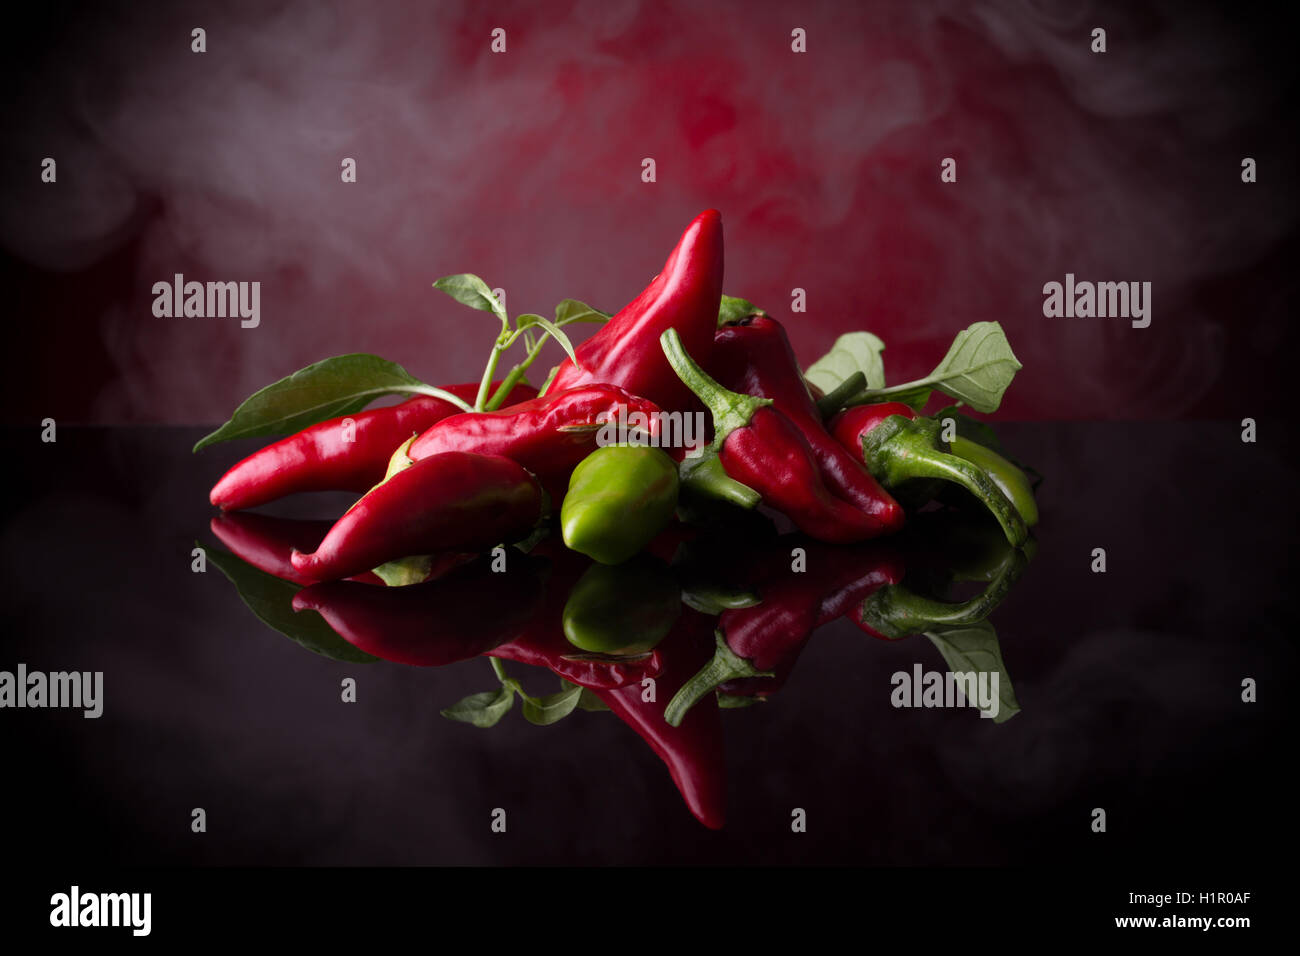 red chili peppers on the black background. Stock Photo